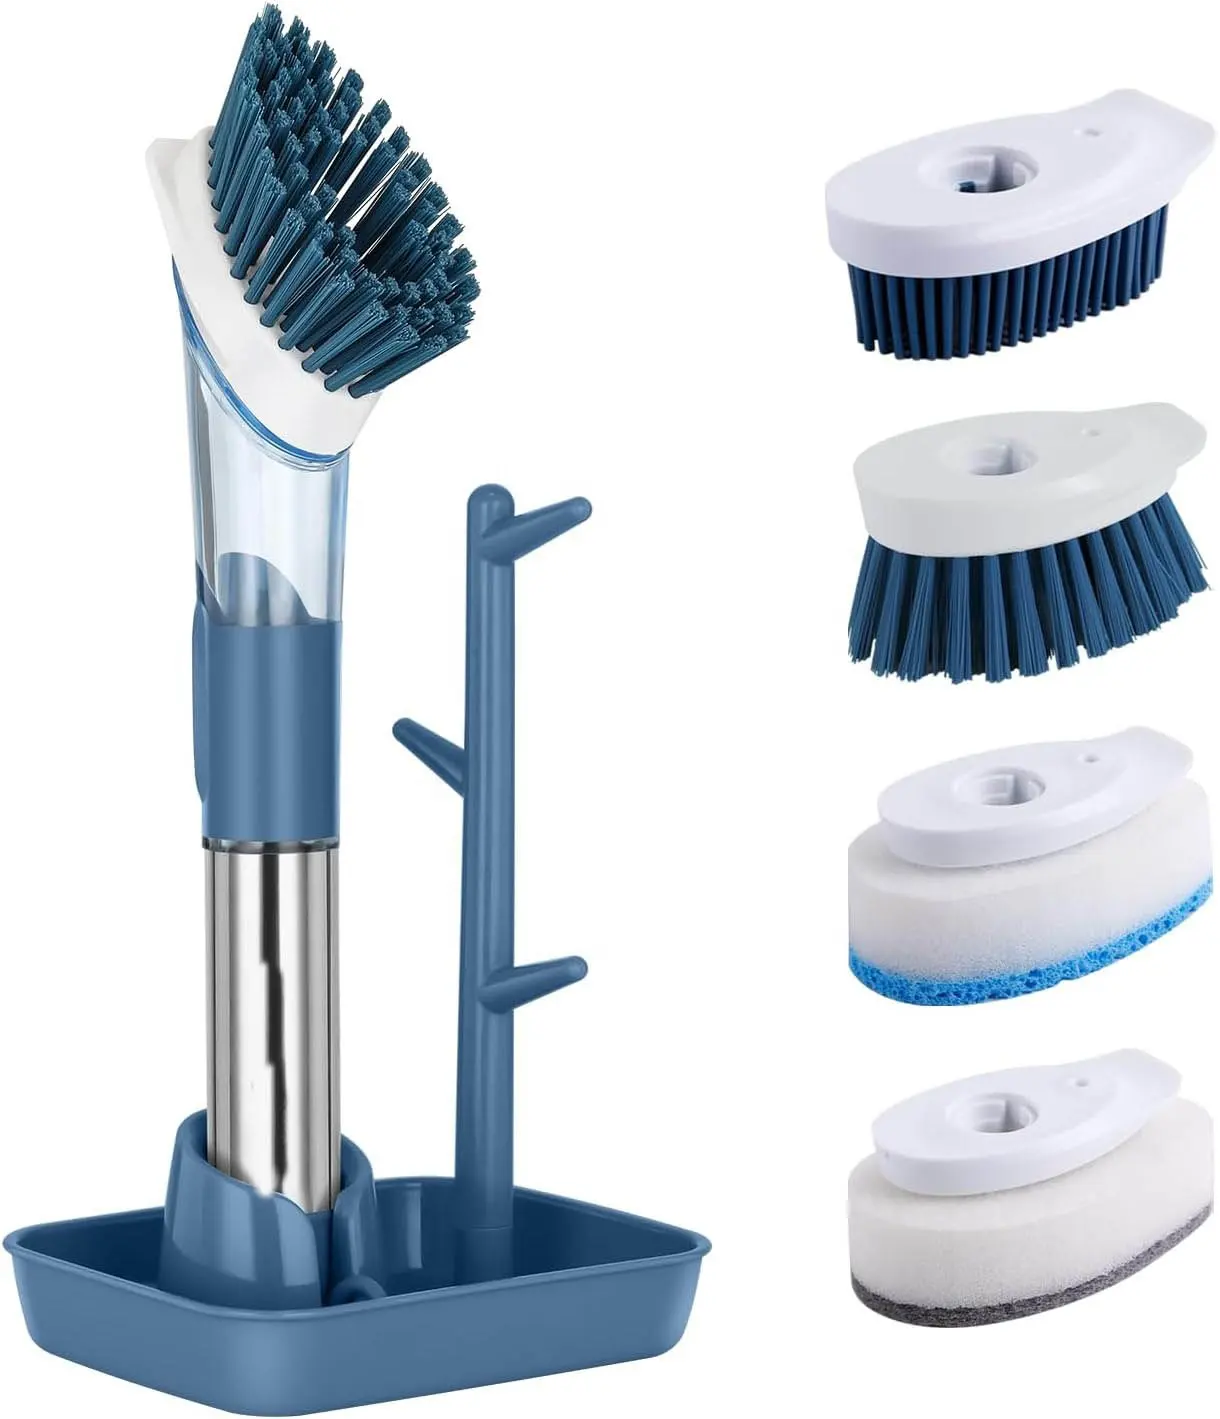 Dish Scrubber Brush with Soap Dispenser, Soap Dispensing Dish Brush with 4 Replaceable Heads for Dishes Pots Sink Cleaning